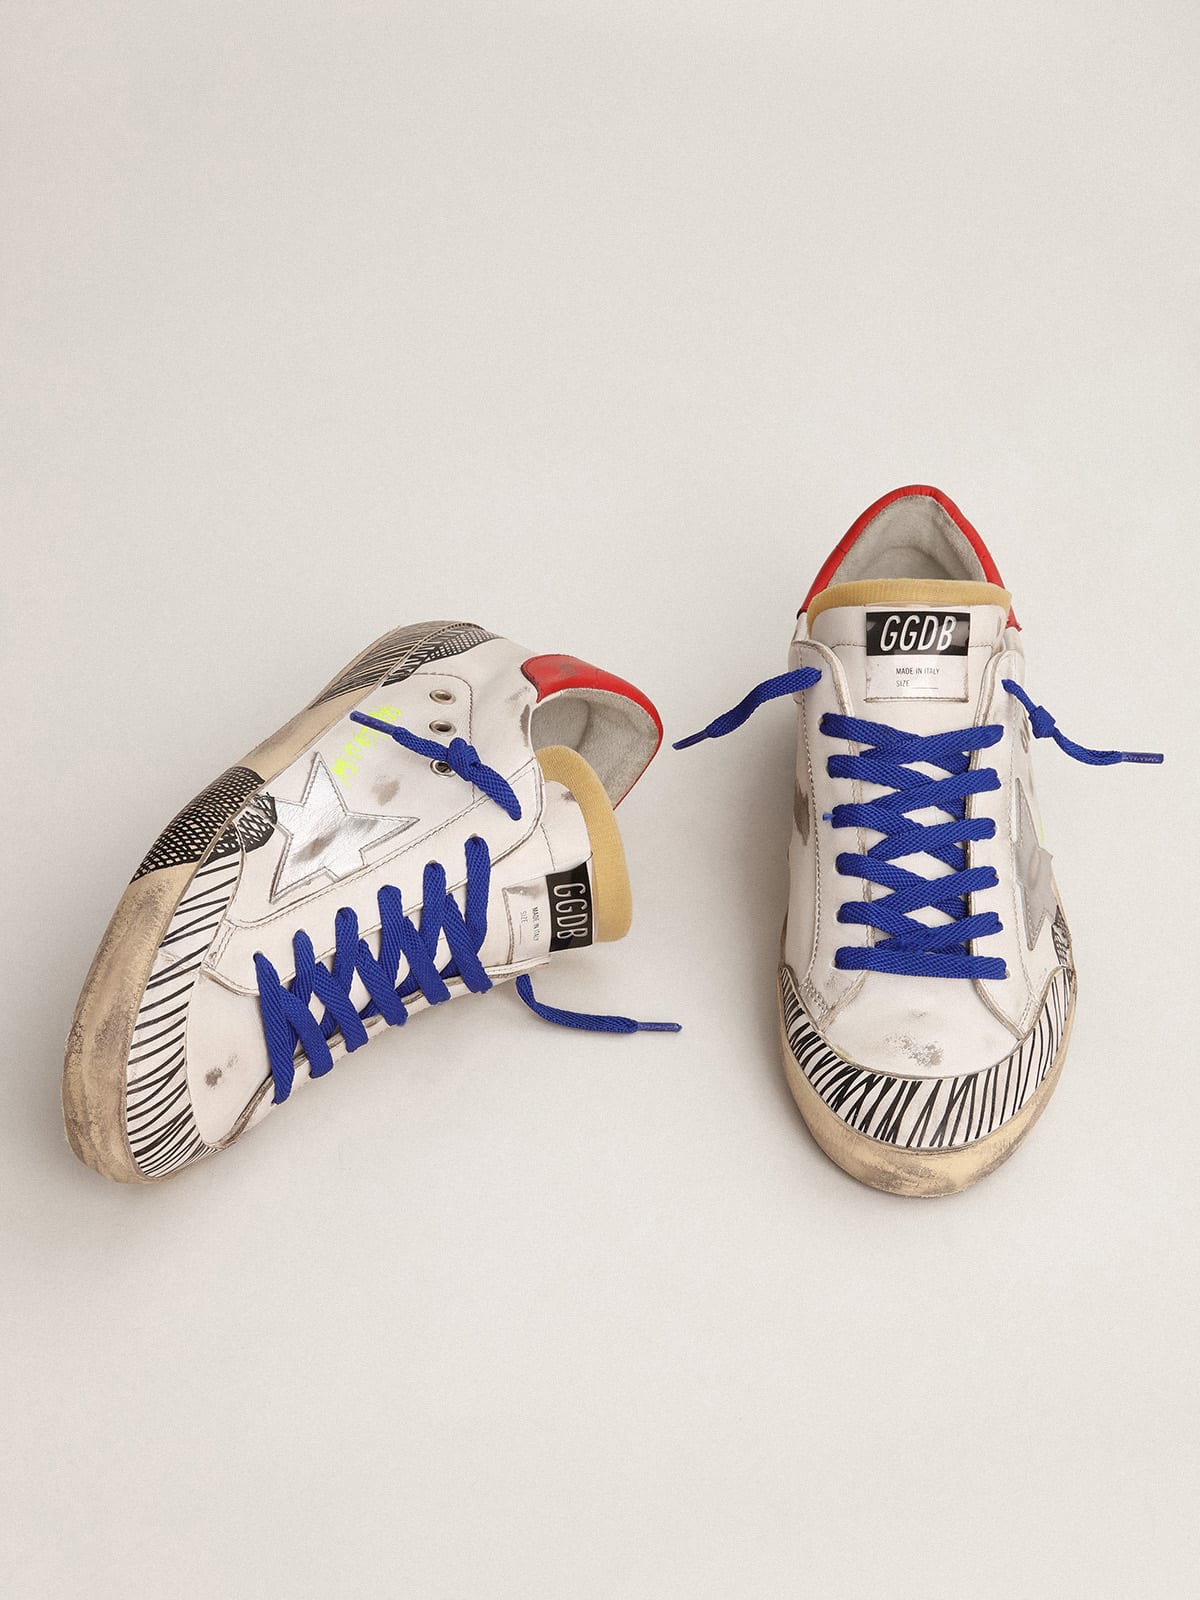 Golden Goose - Super-Star LAB sneakers in white leather and multi-foxing-effect print in 